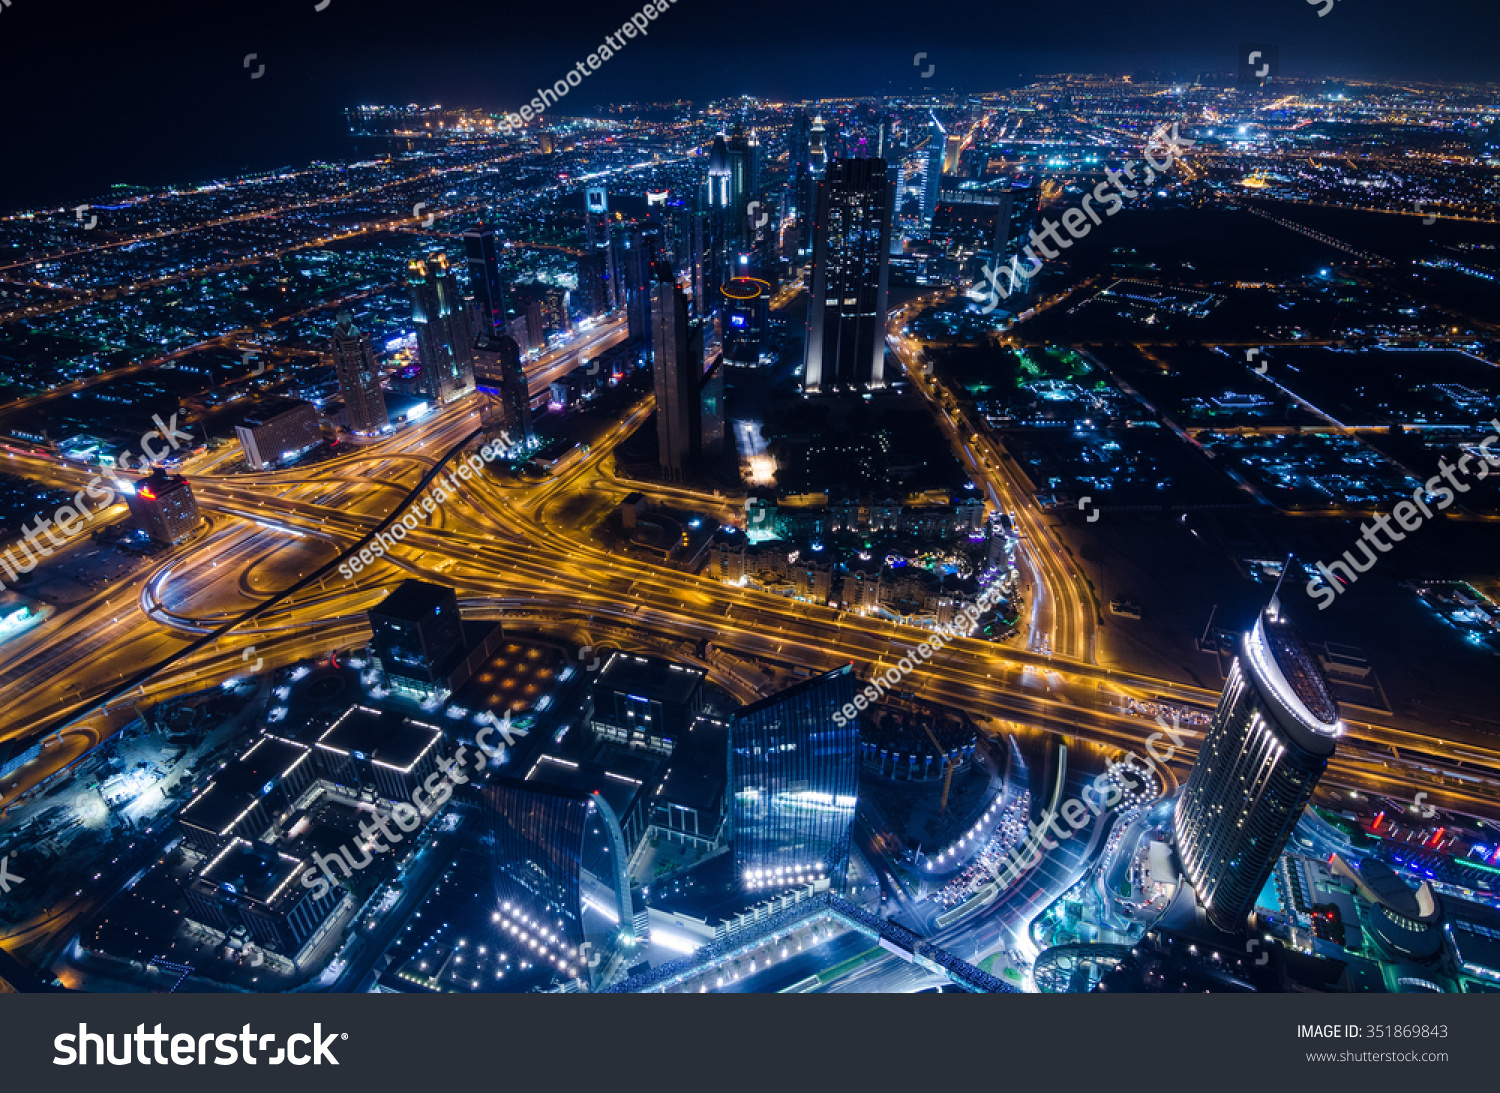 United Arab Emirates Dubai 07/14/2014 downtown dubai futuristic city neon lights and sheik zayed road shot from the worlds tallest tower building in Dubai #351869843